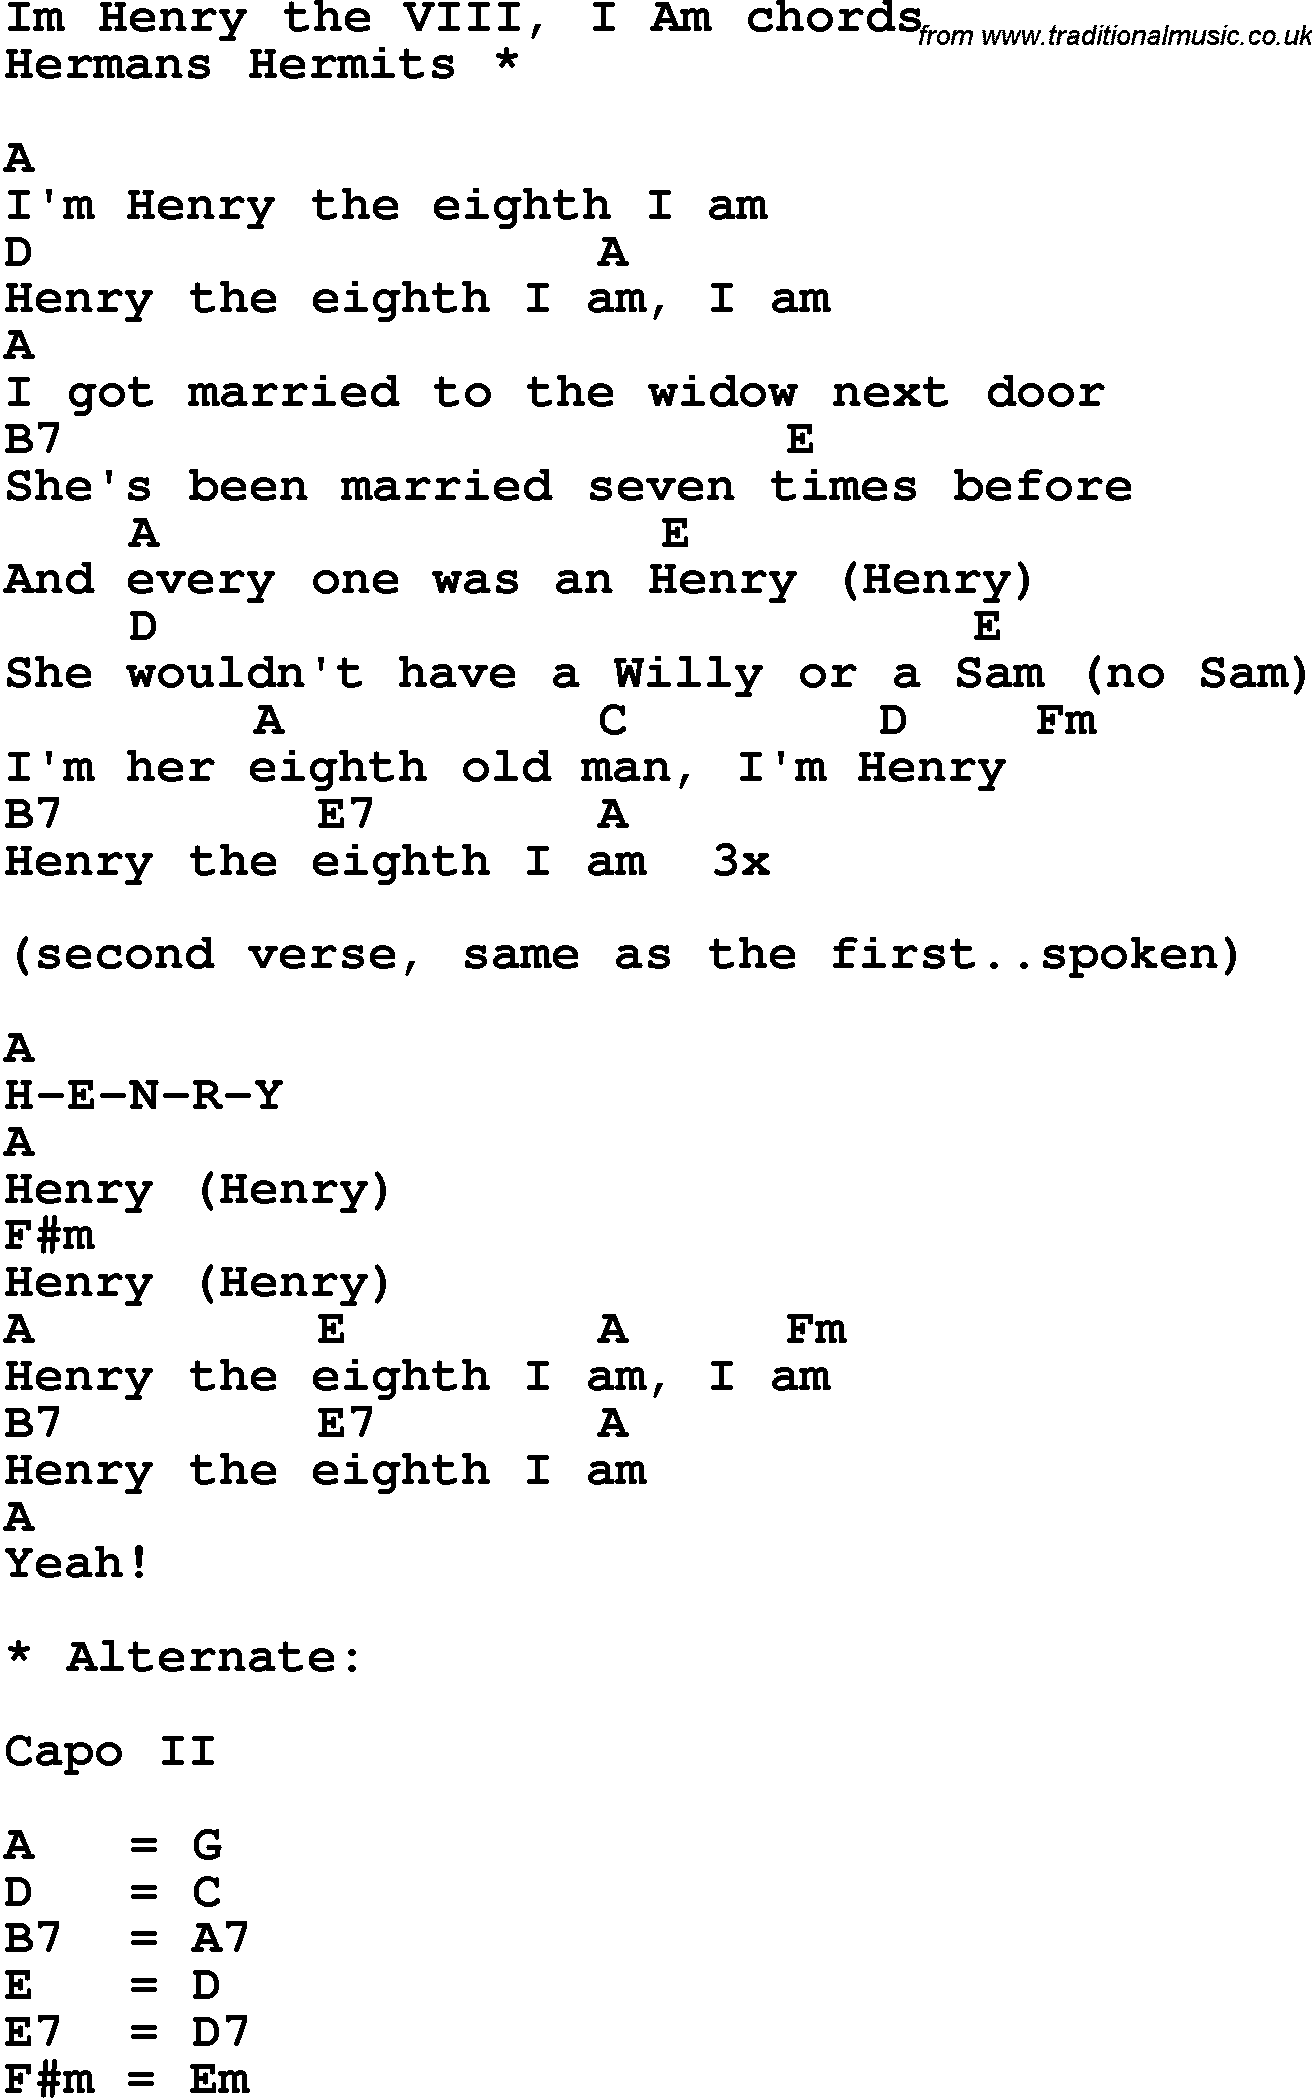 Song Lyrics with guitar chords for I'm Henry Viii